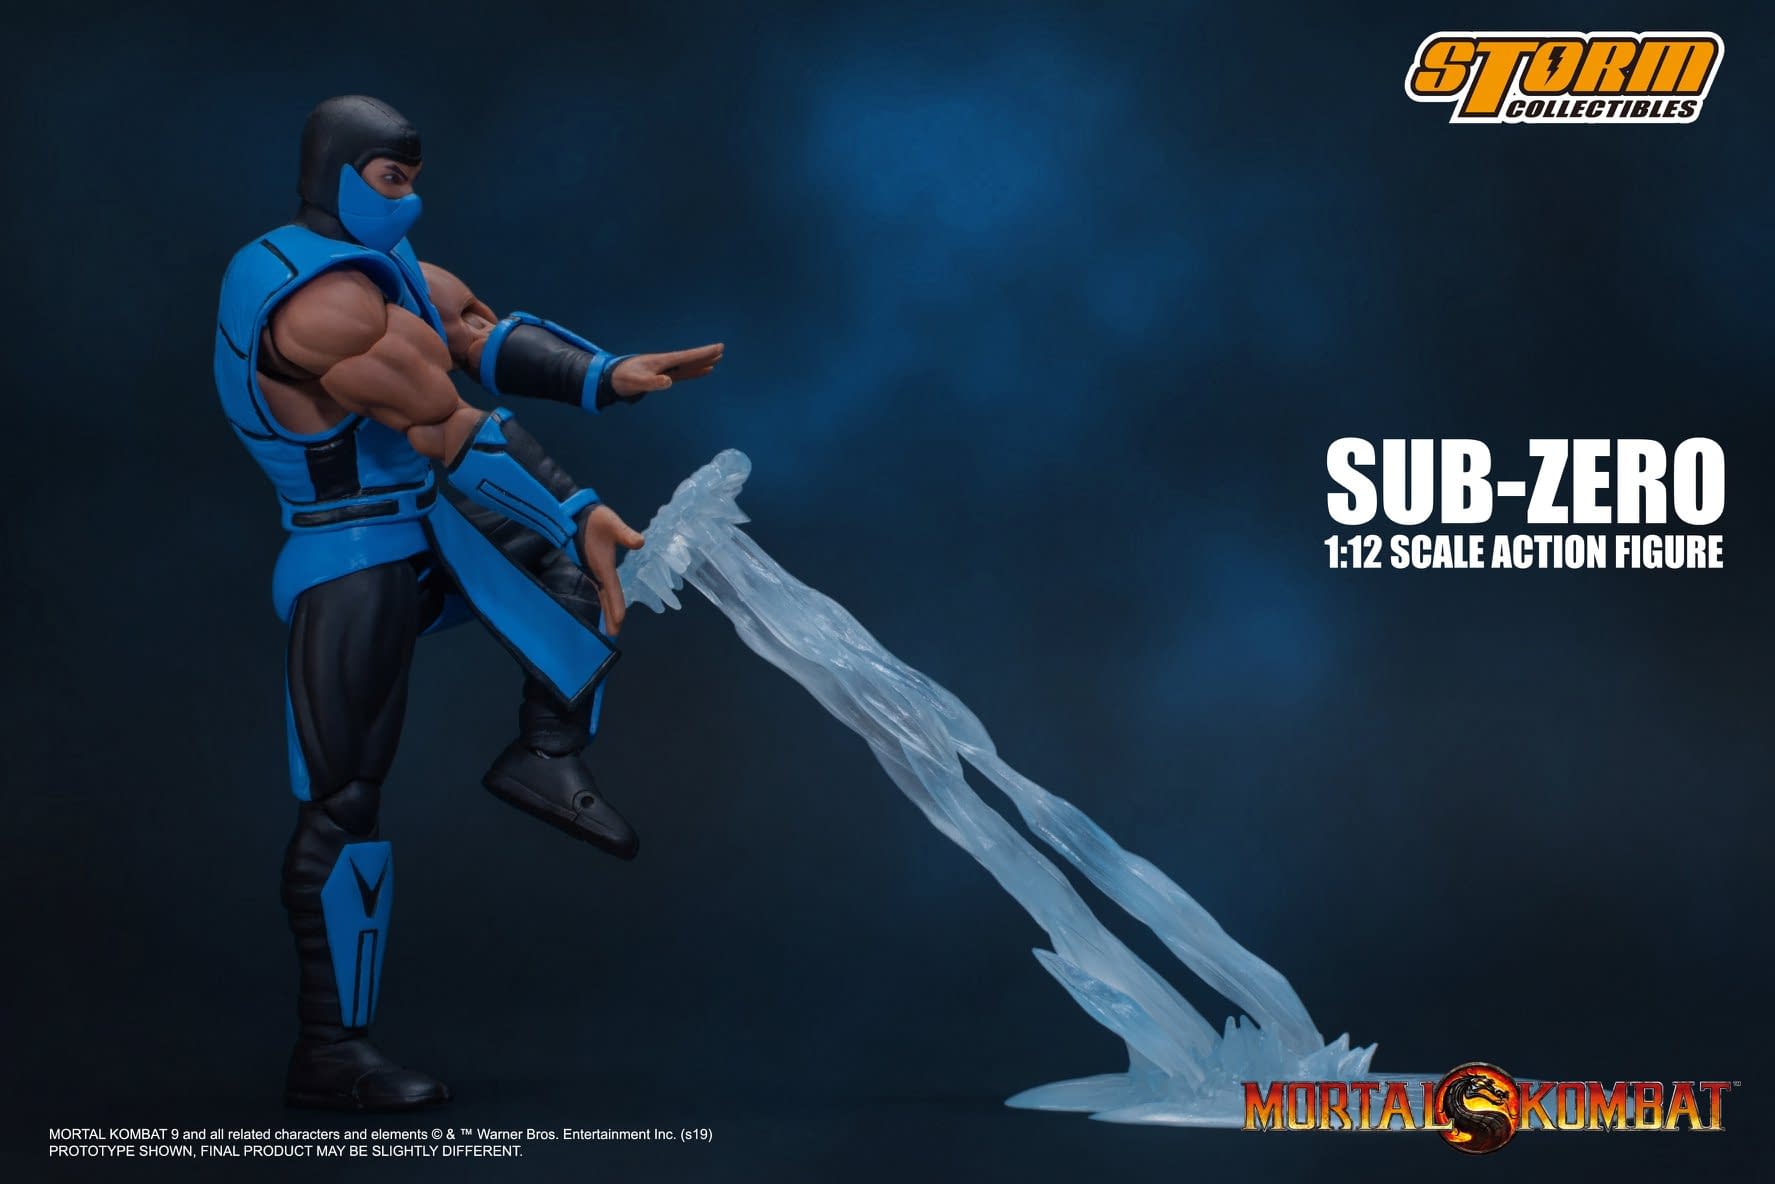 Subzero Brings a Blizzard with New Storm Collectibles Figure